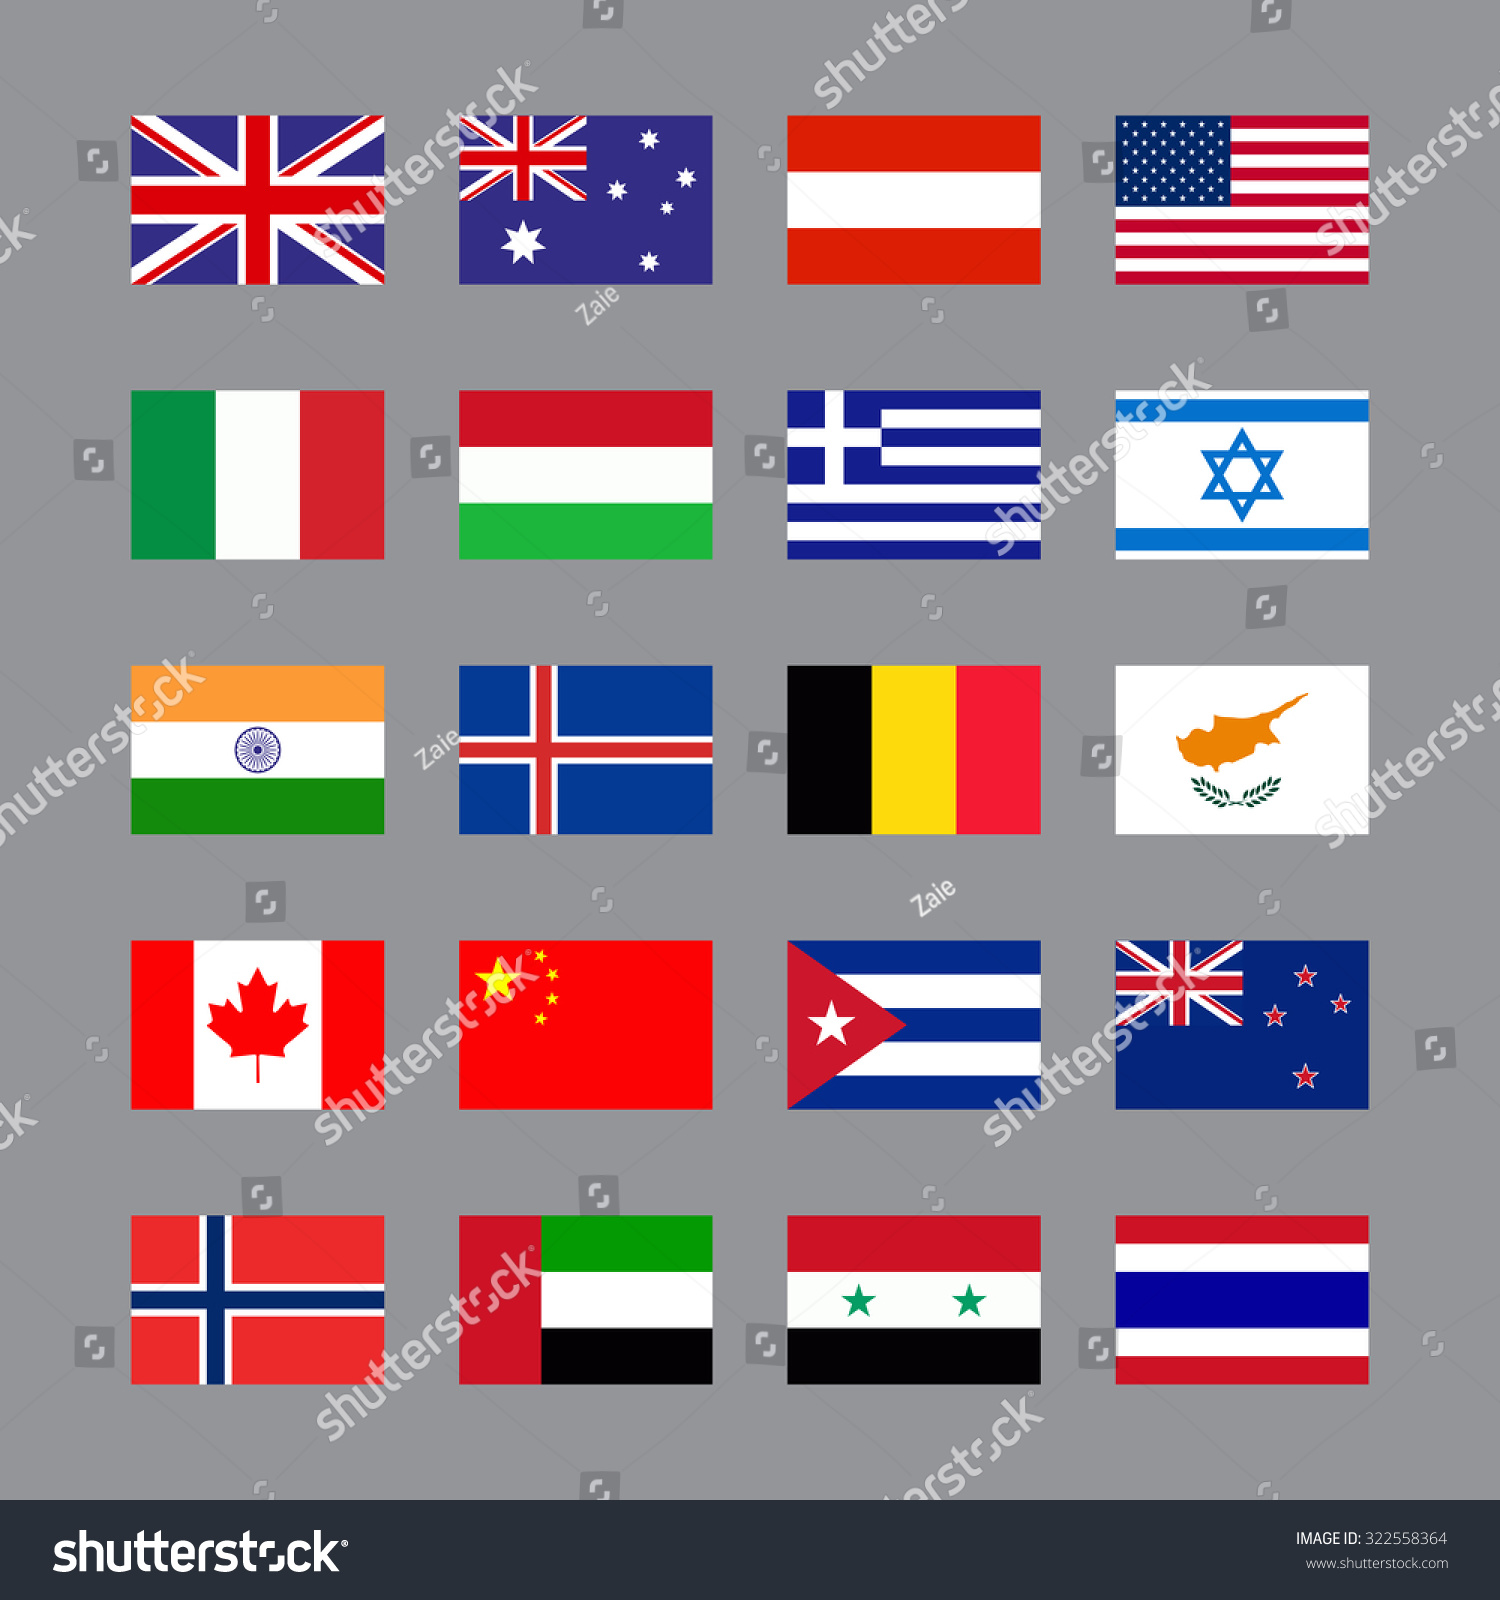 Simple Vector Flags Of The Different Countries. Flag Icons In Flat ...